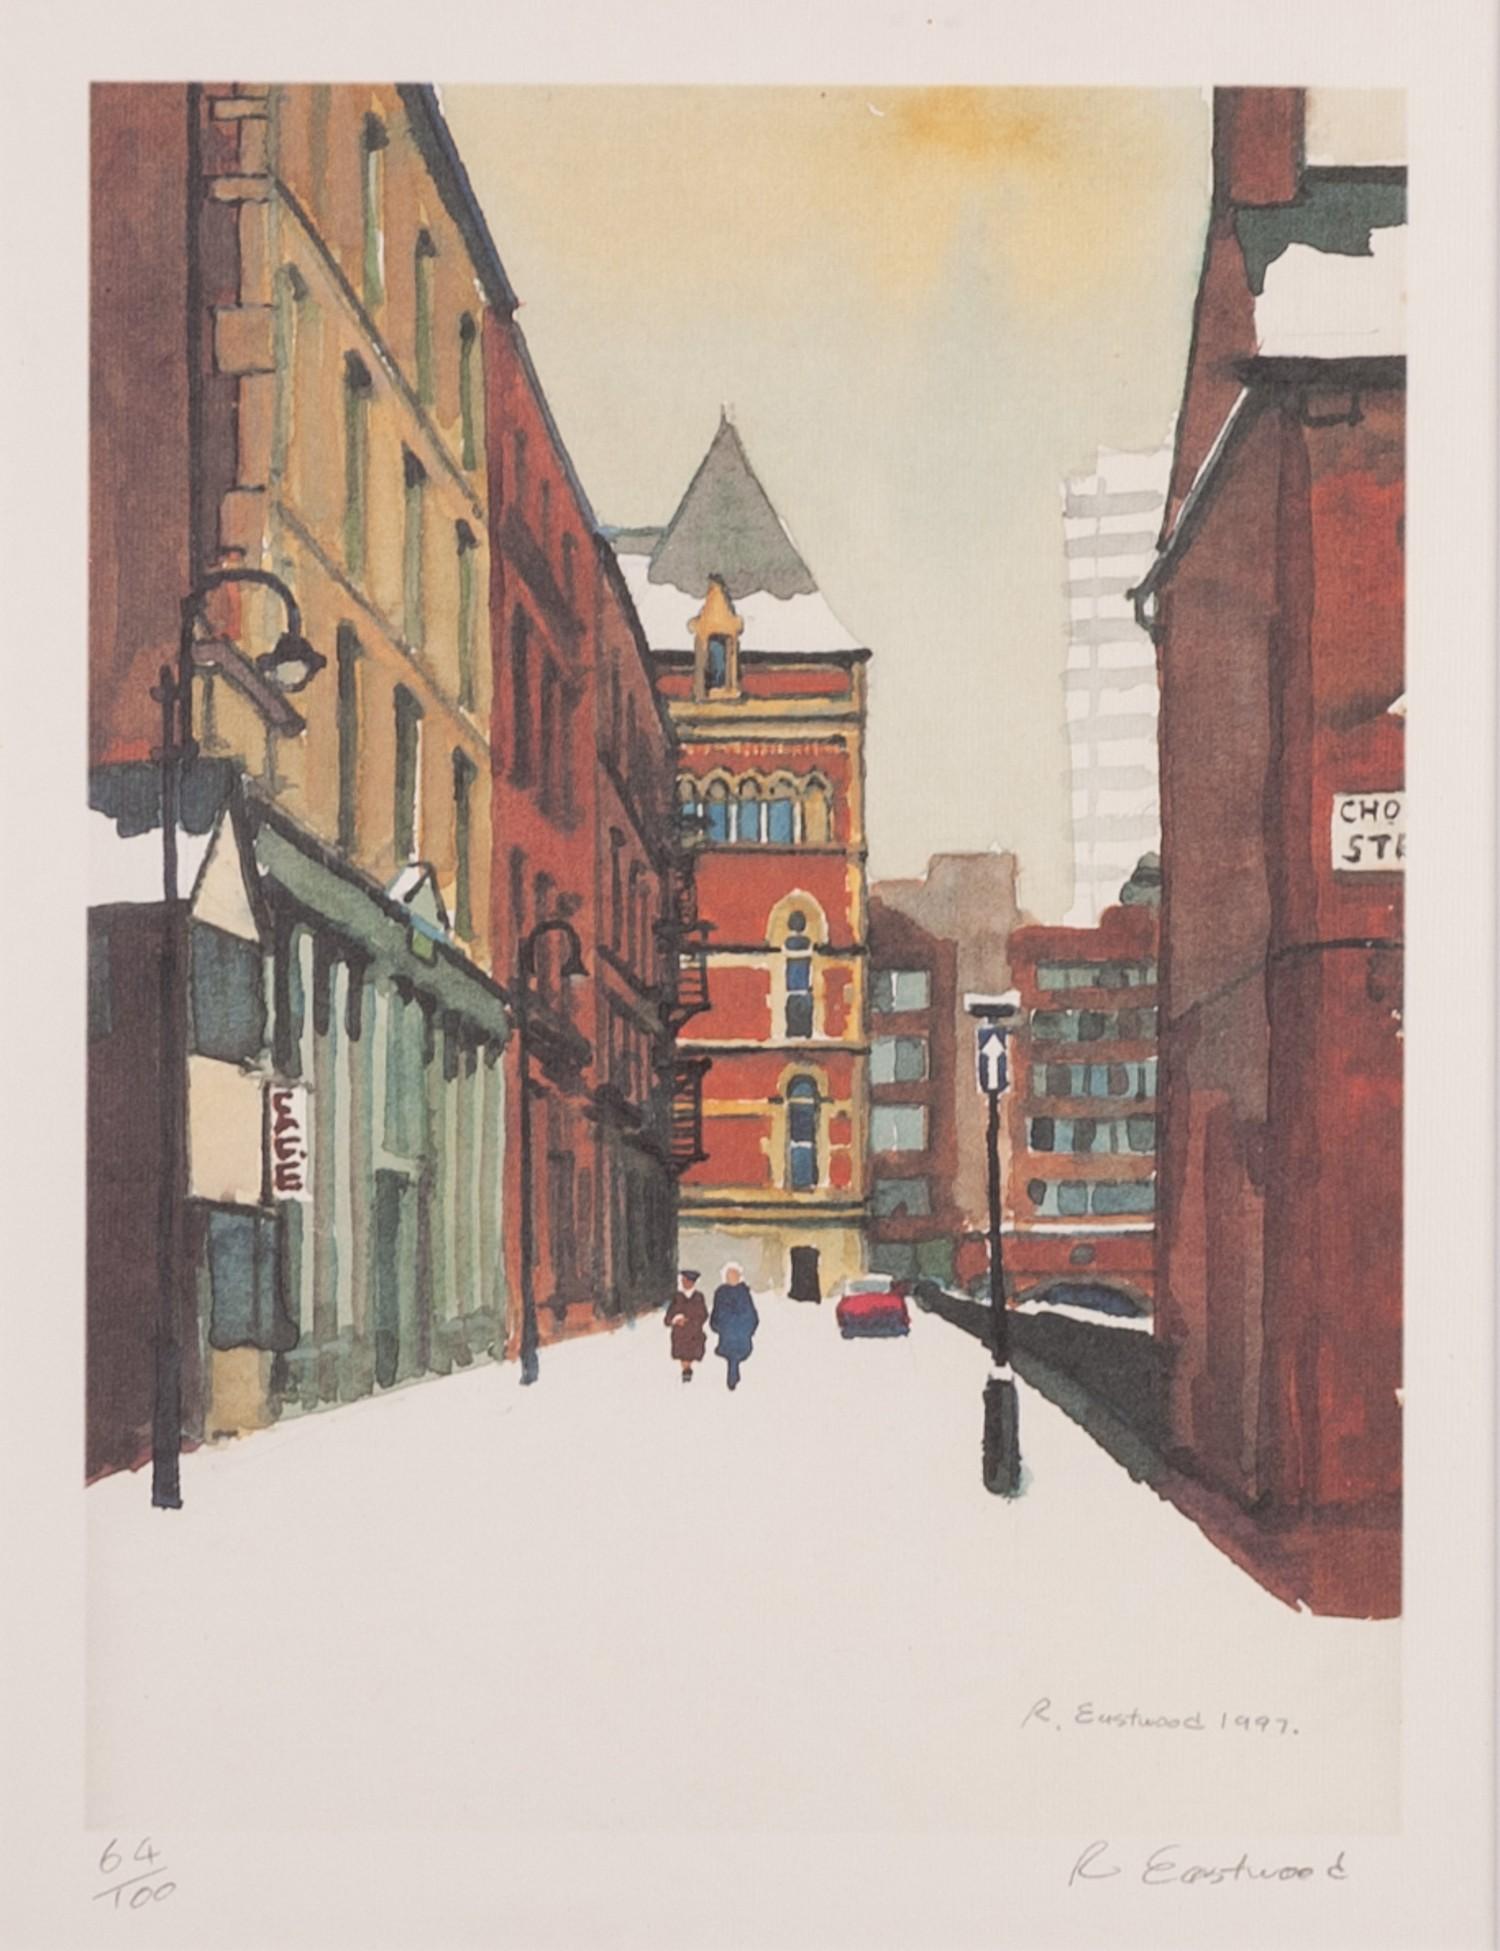 R EASTWOOD COLOURED LITHOGRAPH Artist signed limited edition Canal Street, Manchester signed and